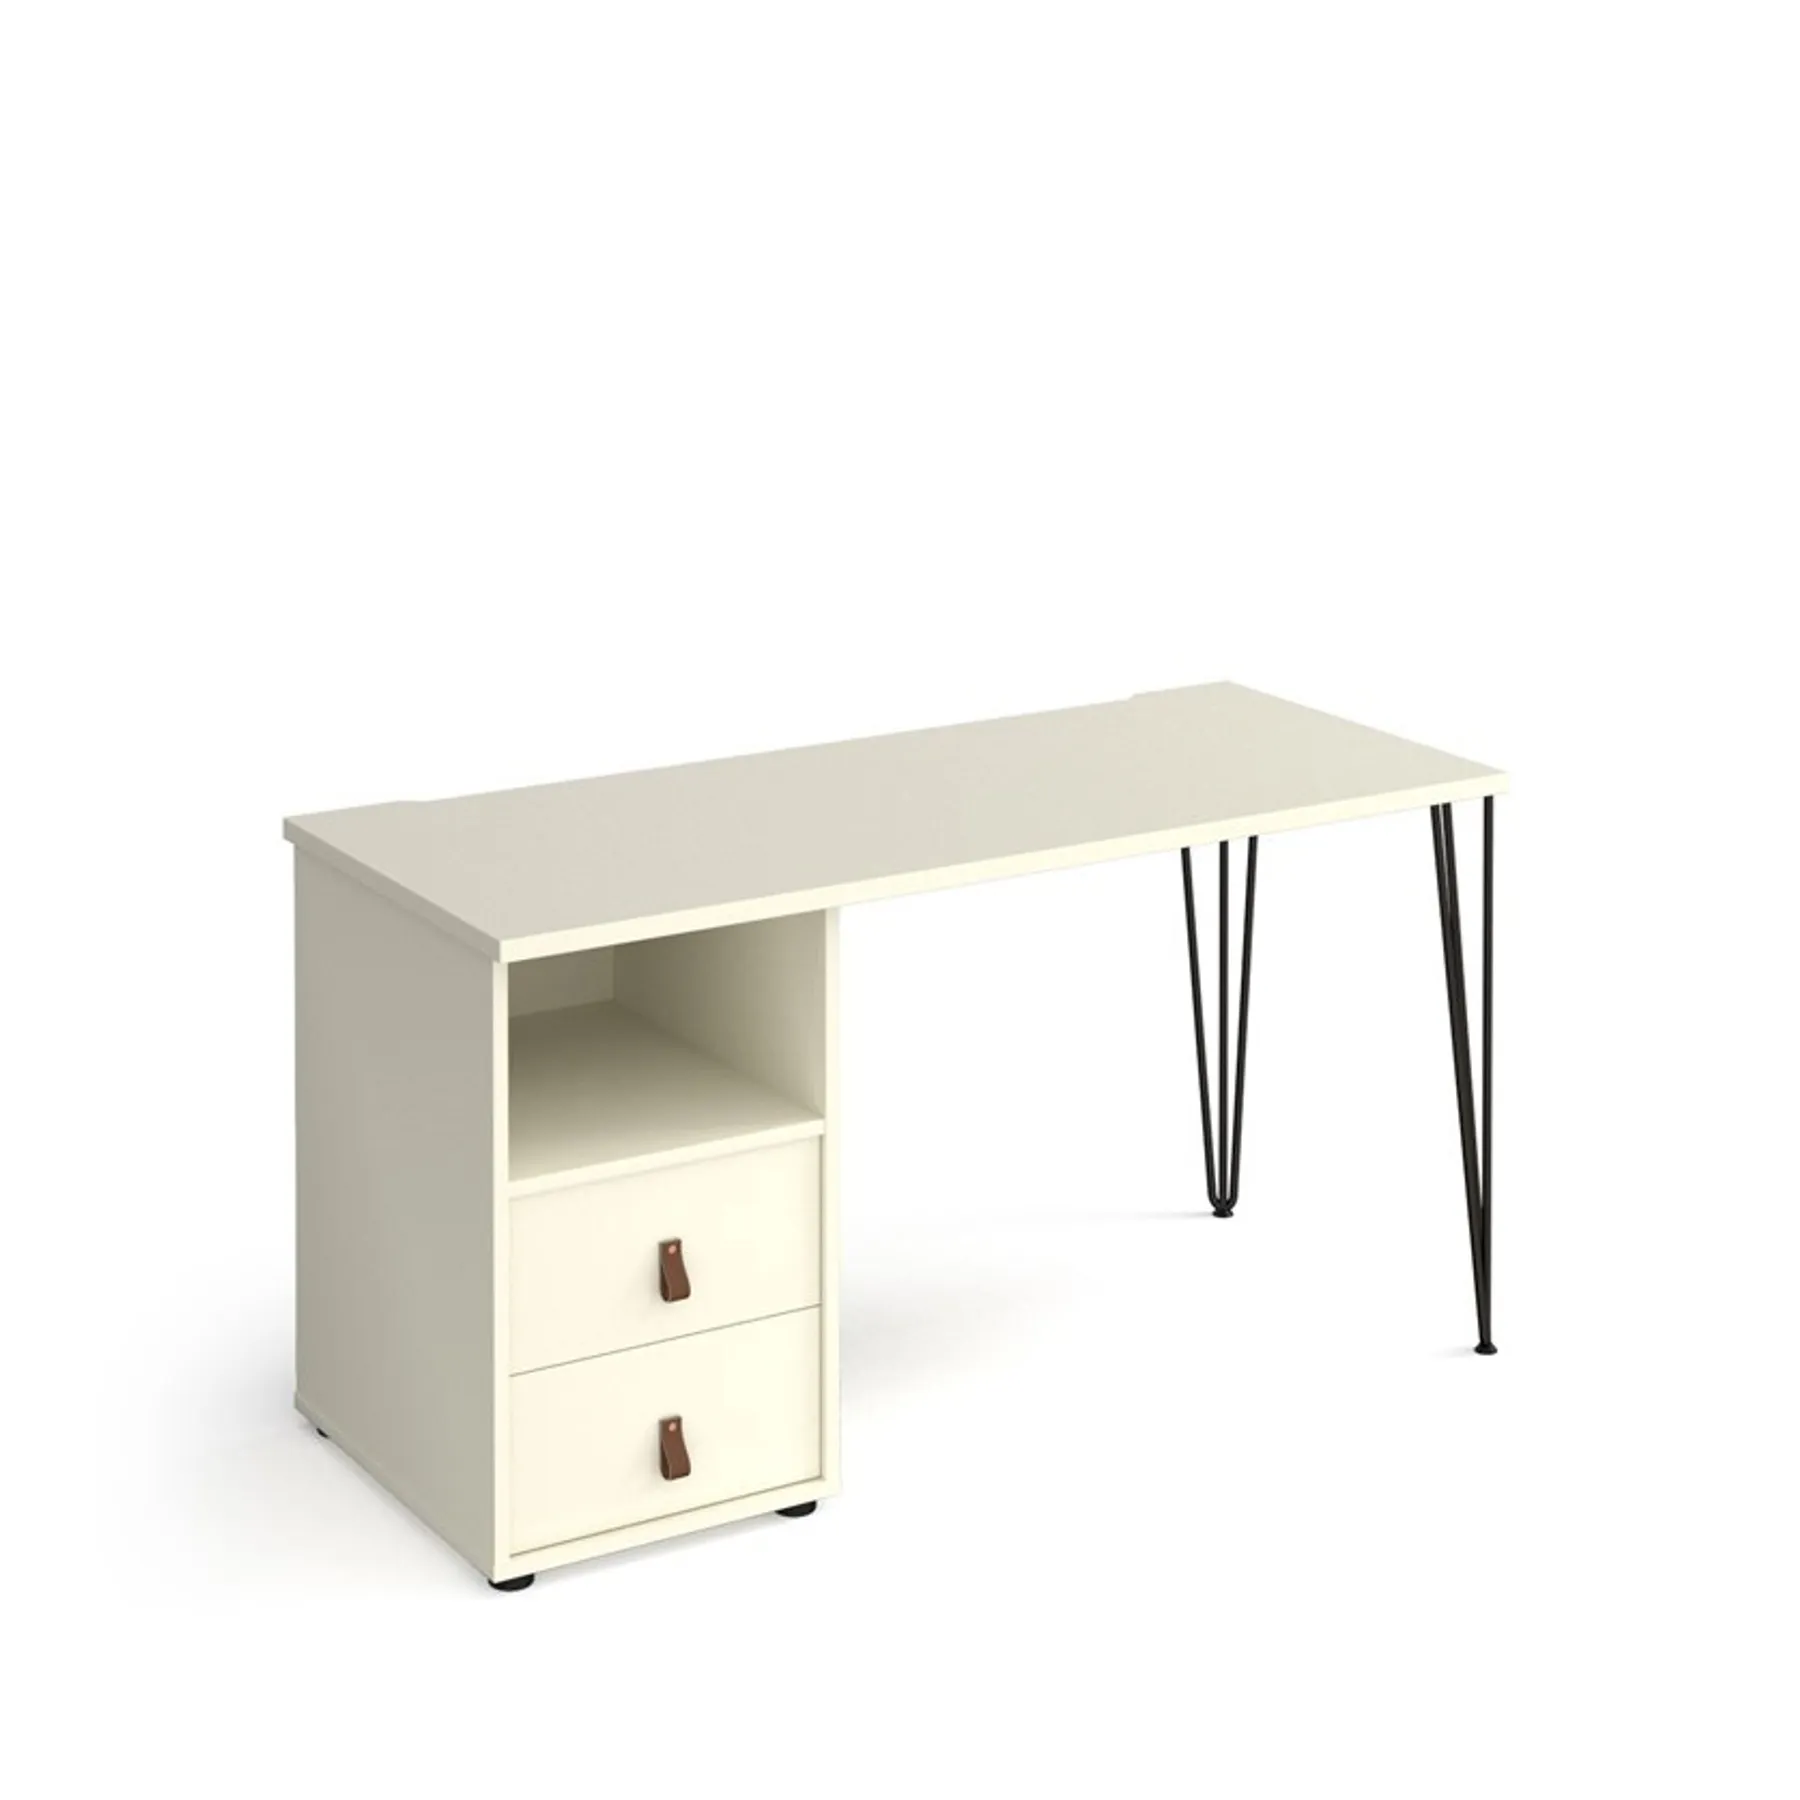 LOF Direct Dams Tikal Hairpin Home Office Desk with drawers White TK614 P D